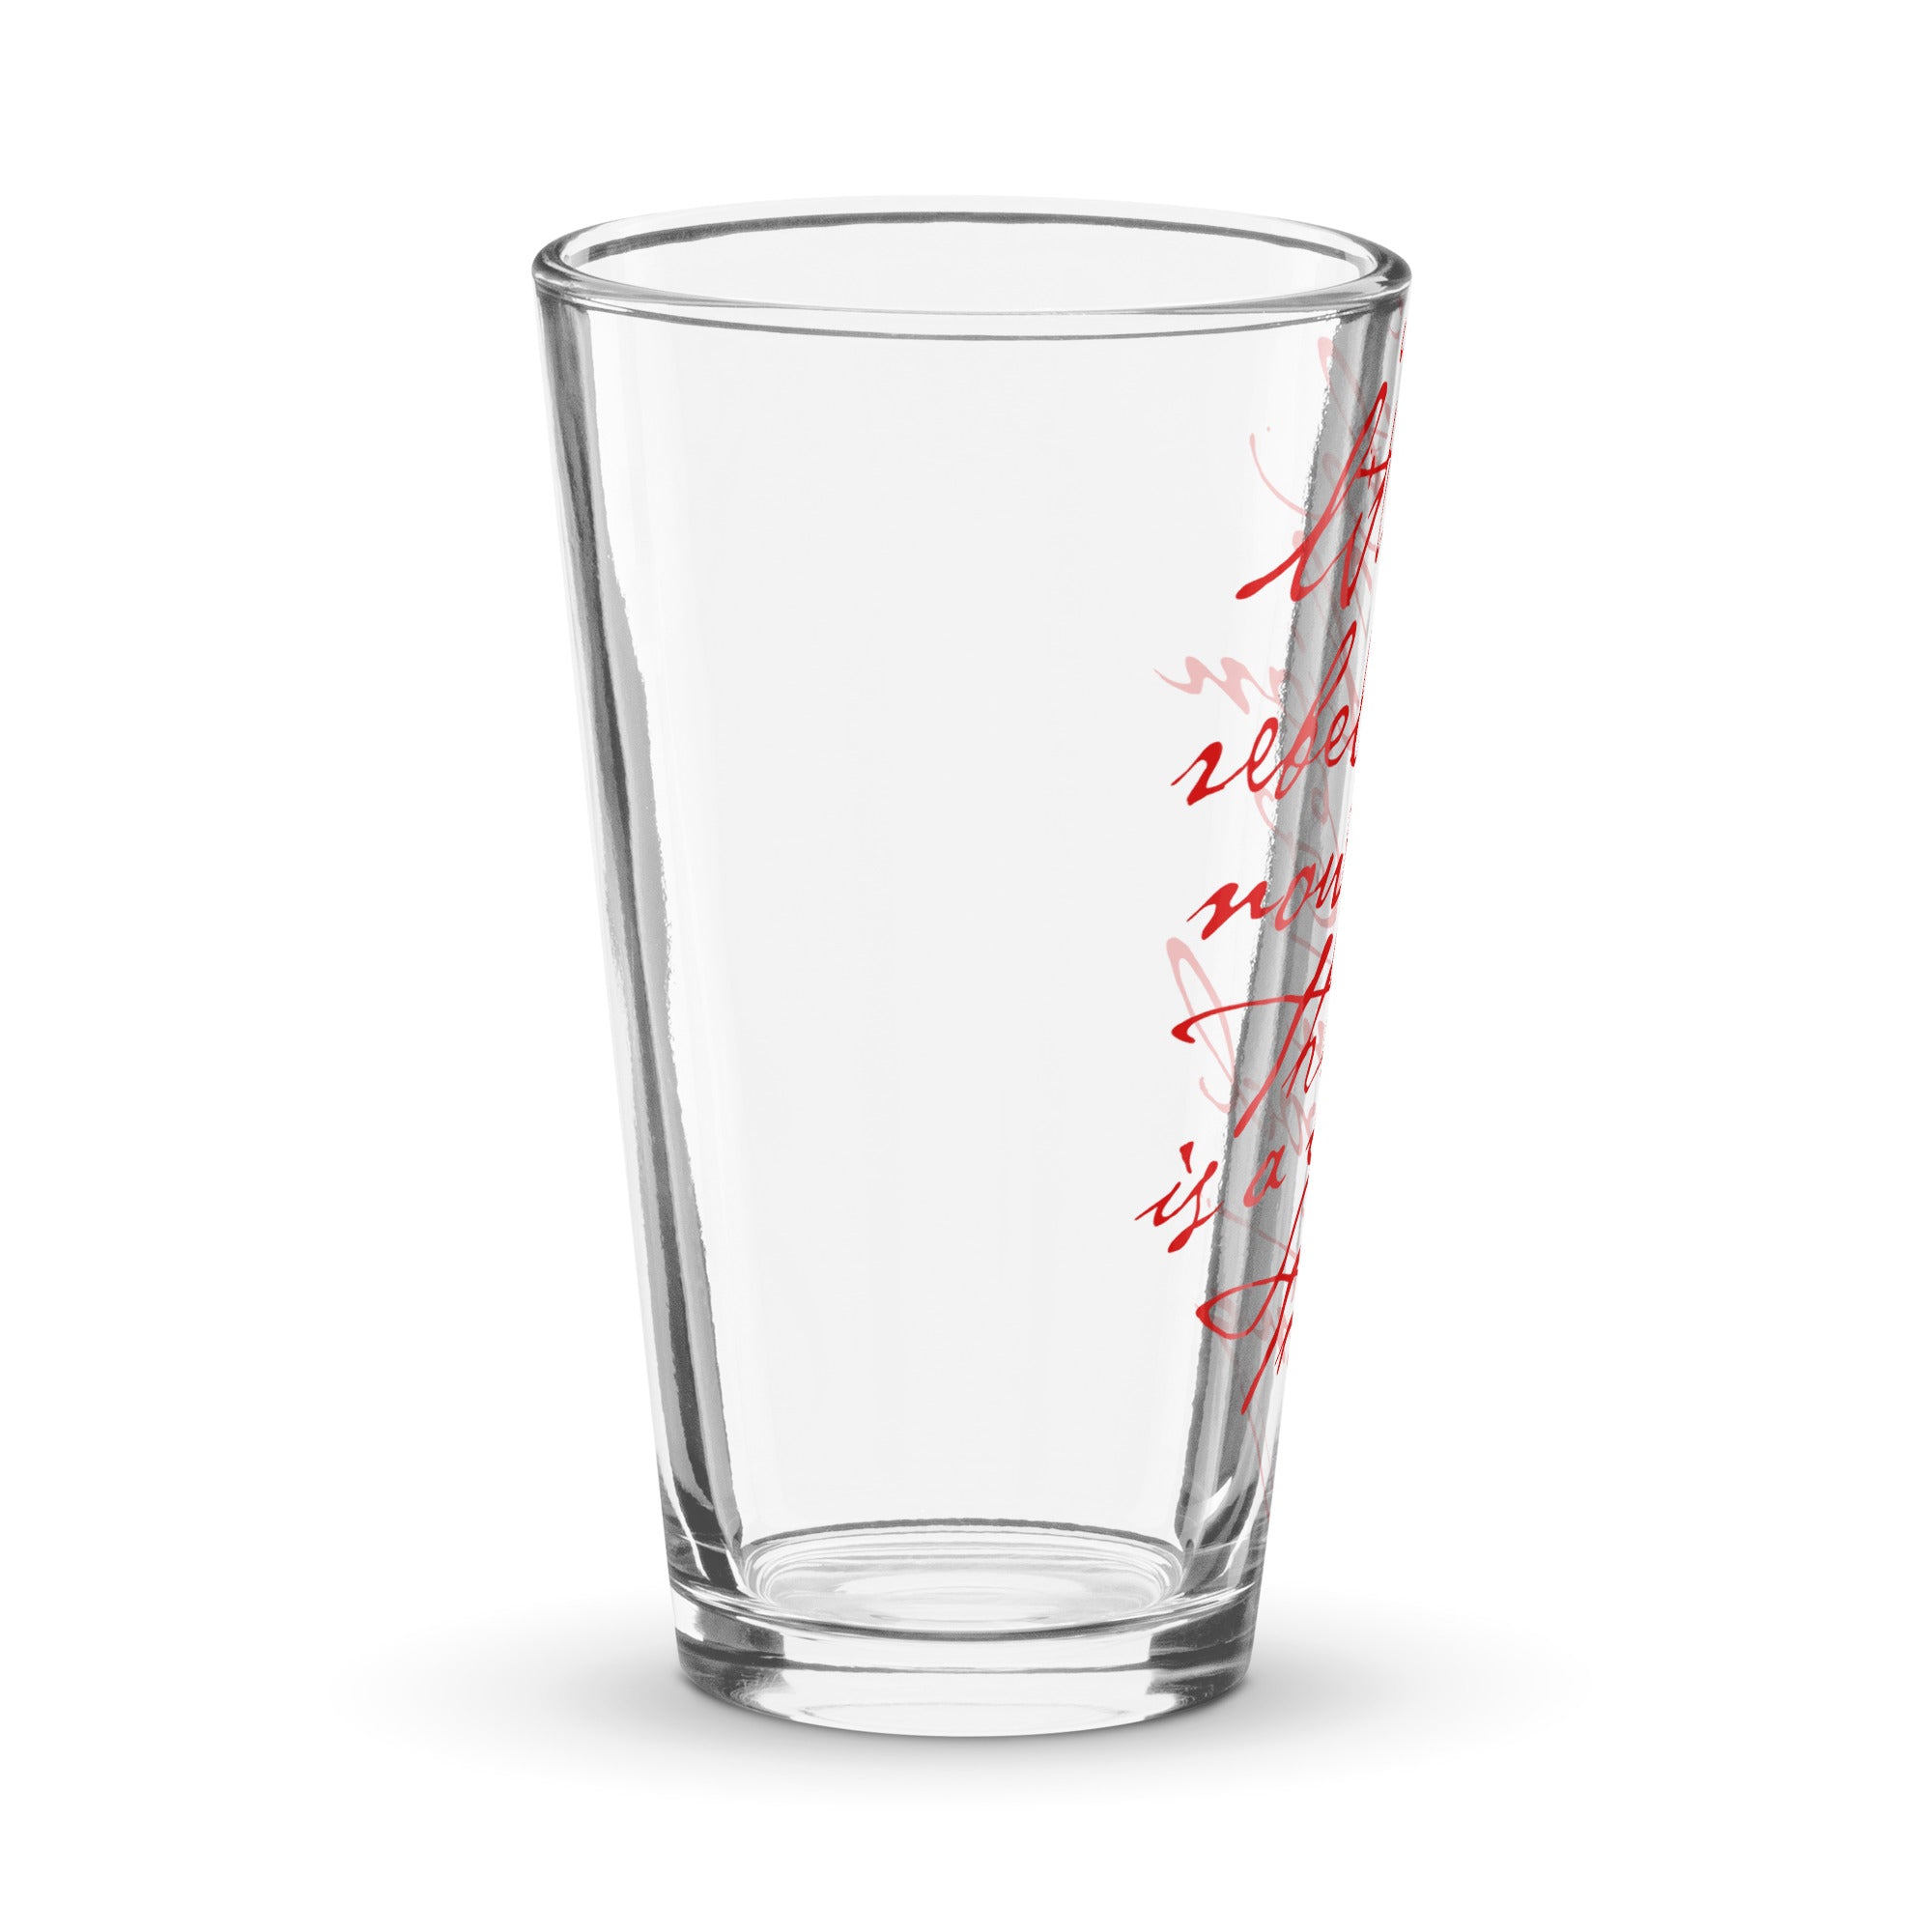 A Little Rebellion Now and Then is a Good Thing Jefferson Quote Shaker Pint Glass